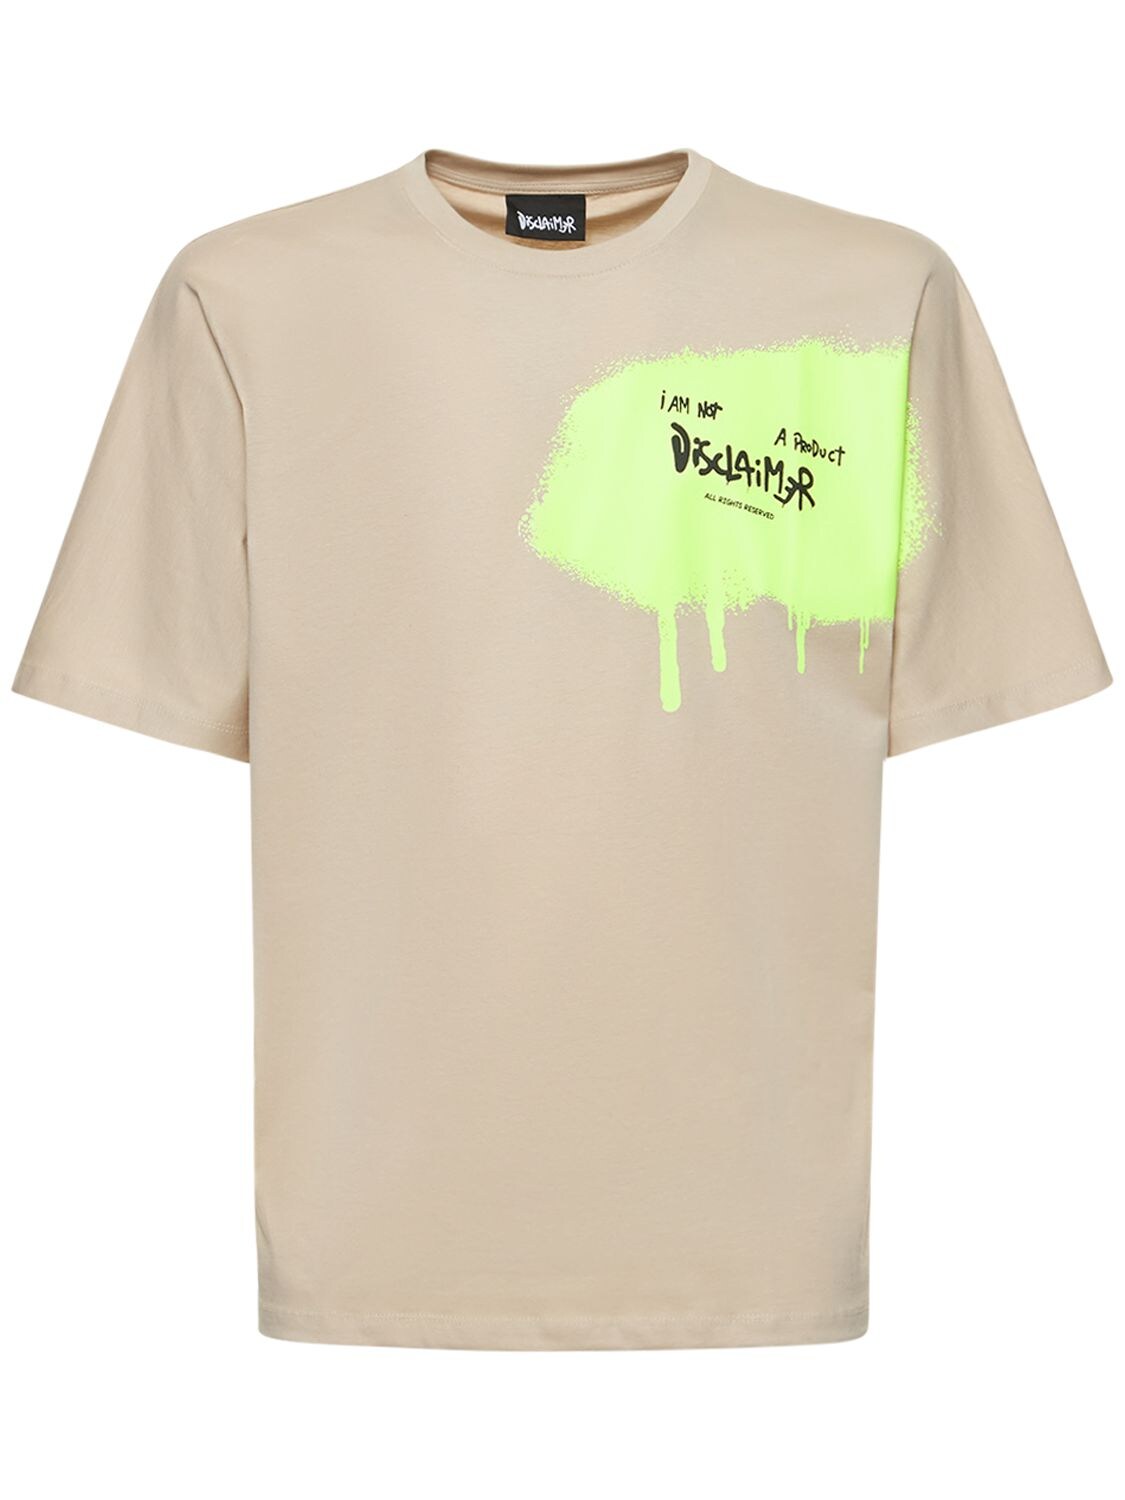 DISCLAIMER Spry Painted Logo Cotton T-shirt